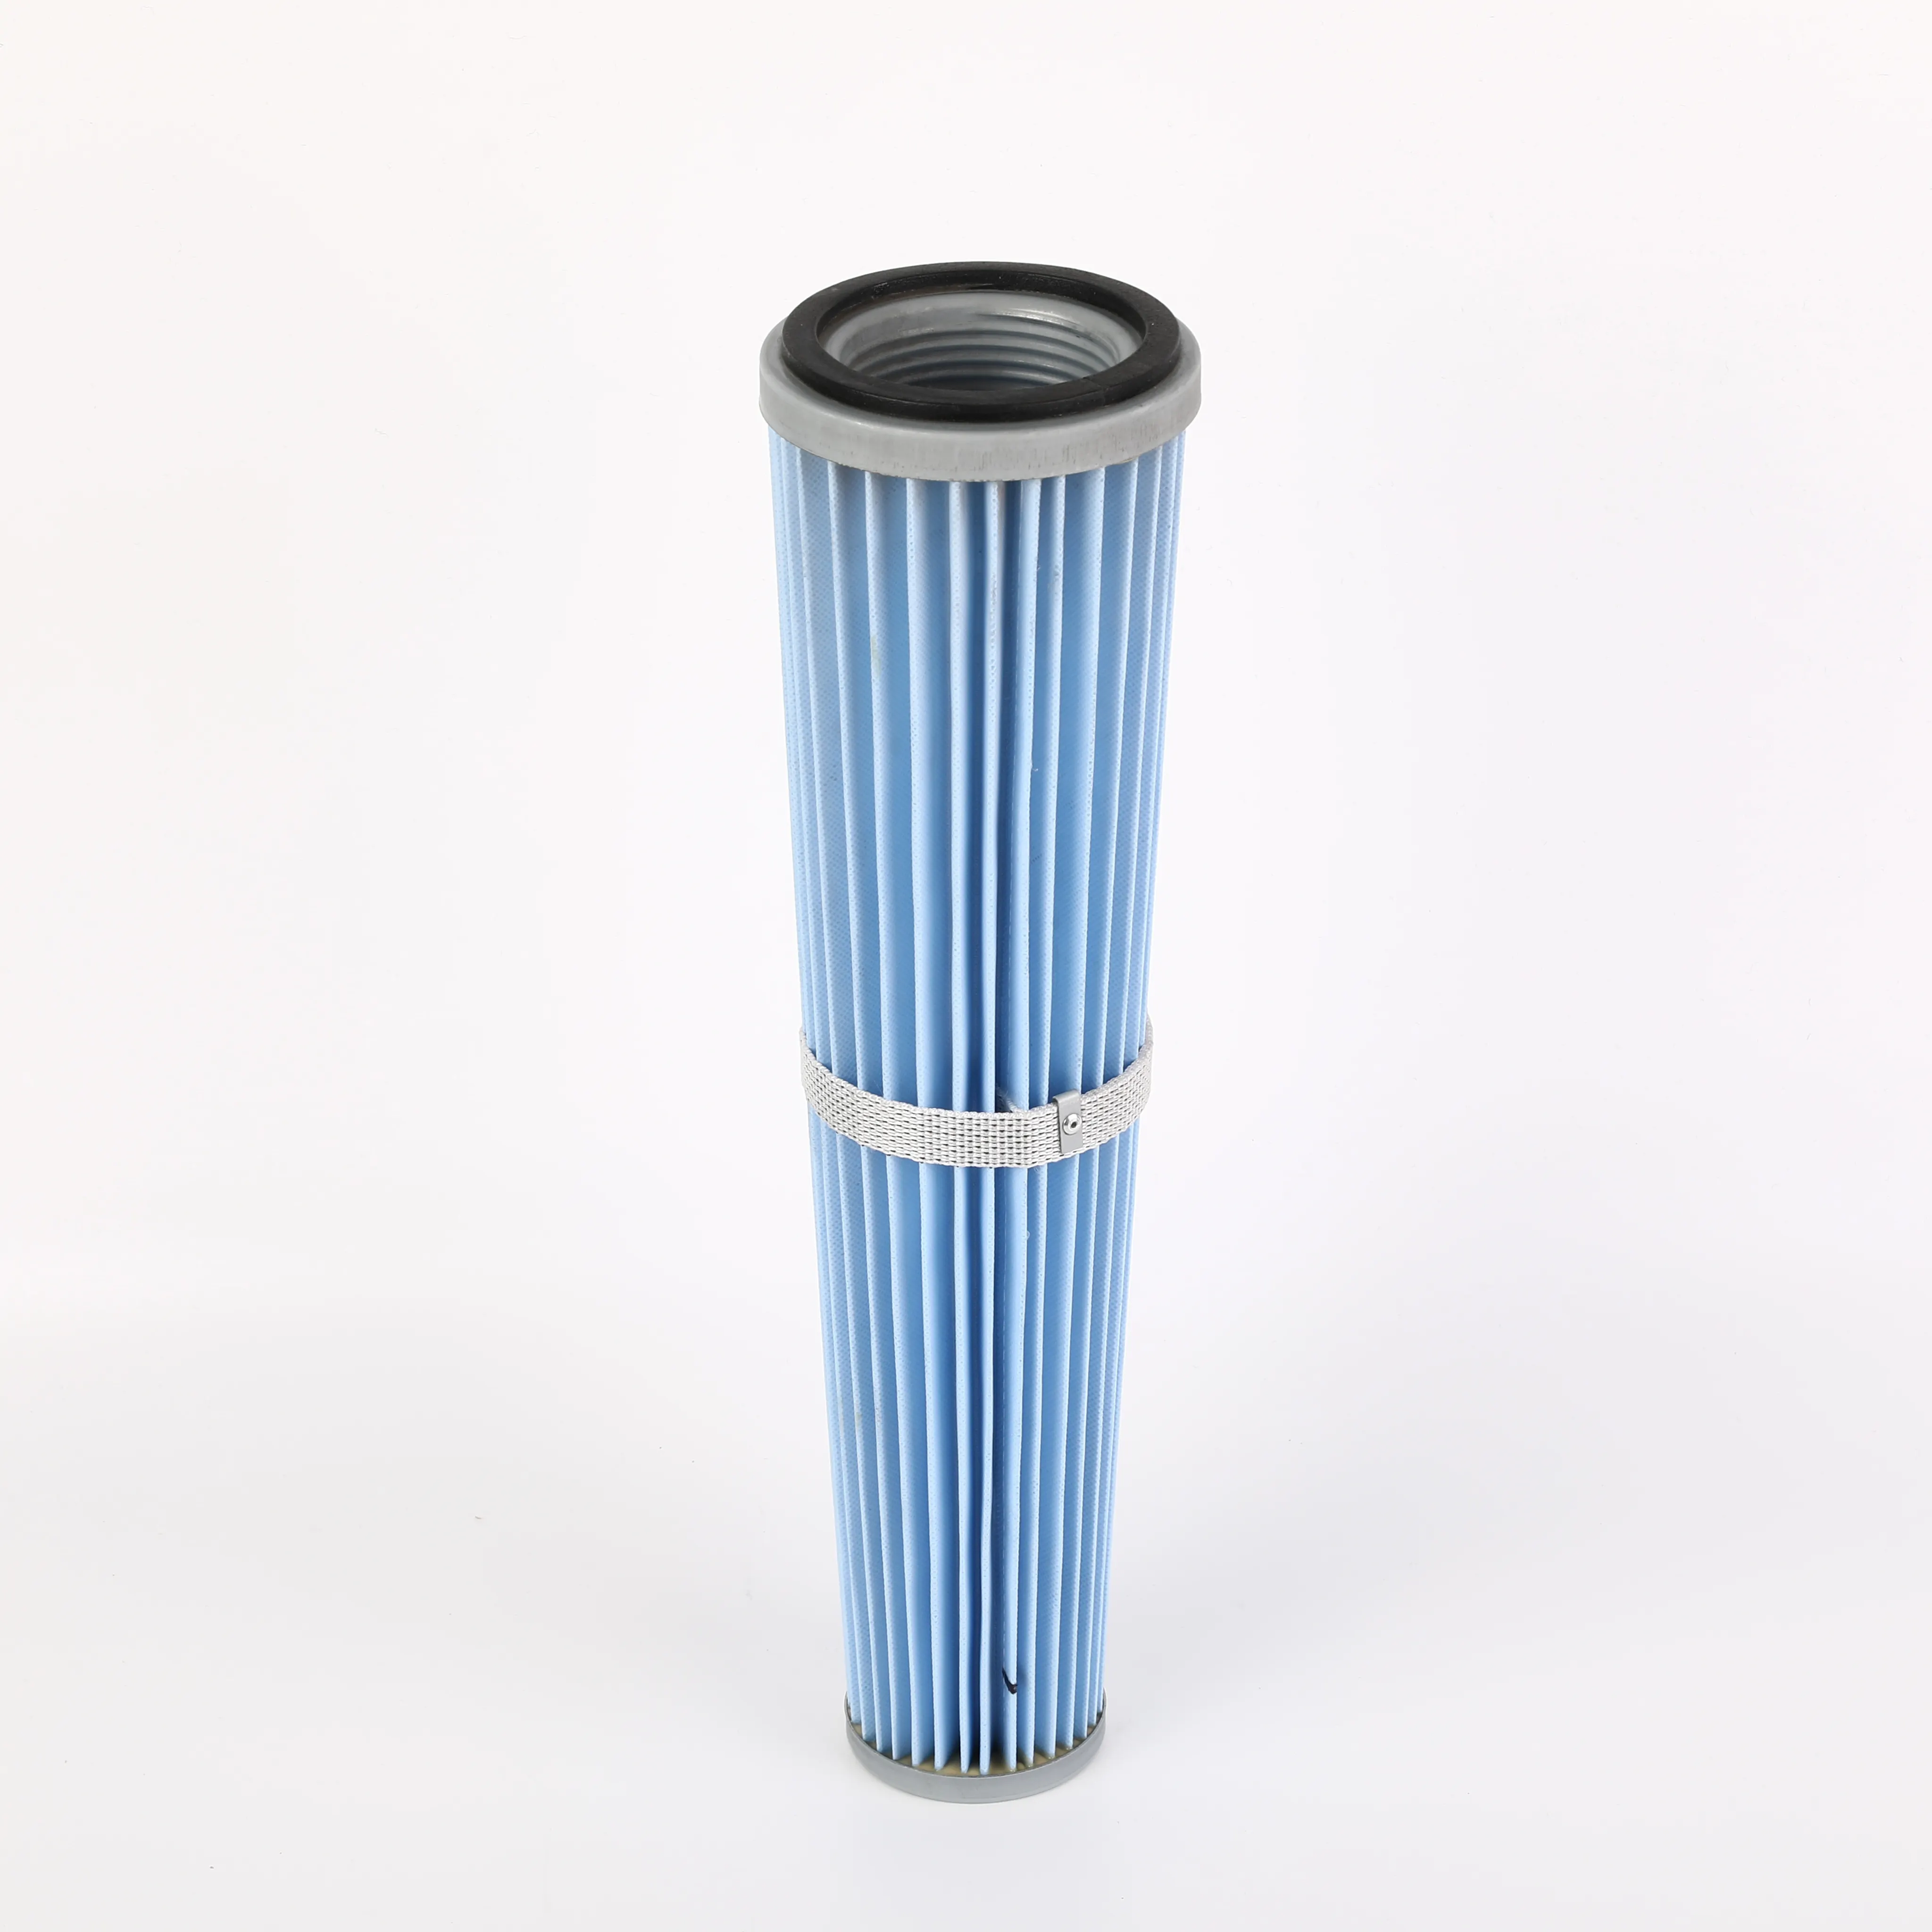 China Wholesale Paper For Air FiltersHigh Quality Hot Selling Paper Pleated Air Filter Cartridge